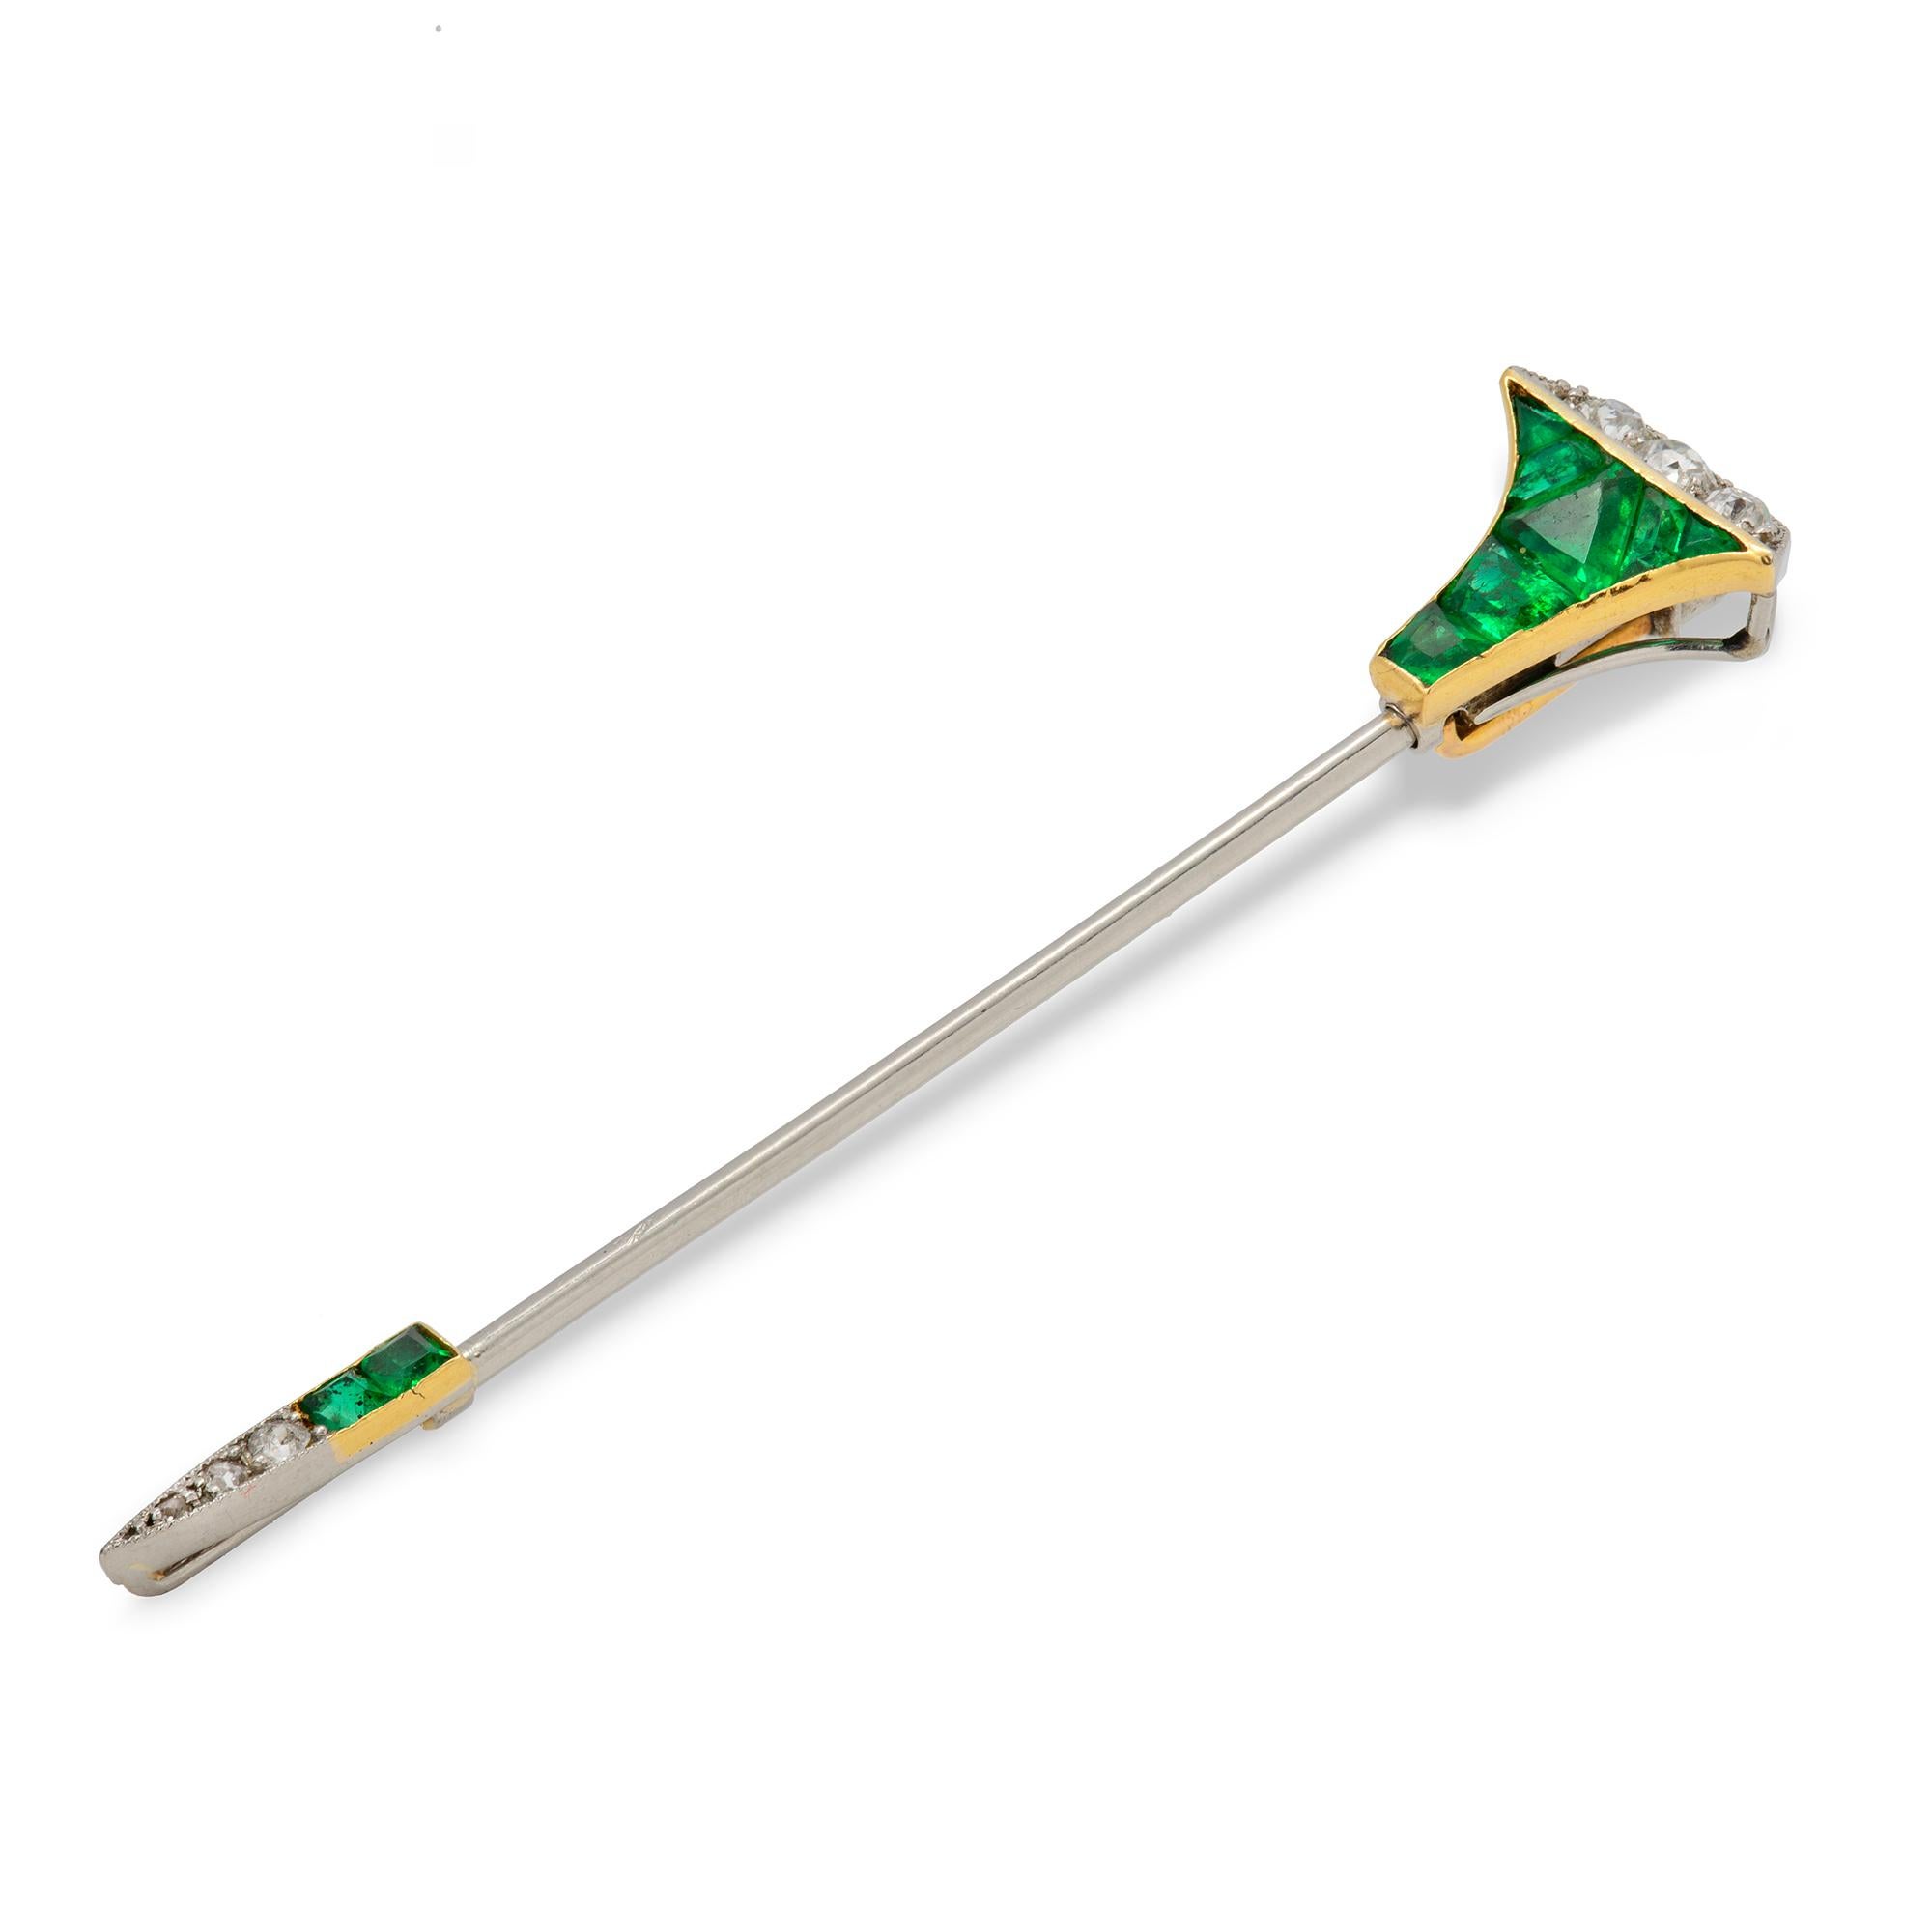 A Cartier emerald and diamond  stick-pin, the pin in the form of a horse shoe nail, the head and the point set with calibre-cut emeralds and old-brilliant-cut diamonds, set in platinum and yellow gold, bearing French platinum hallmark and signed